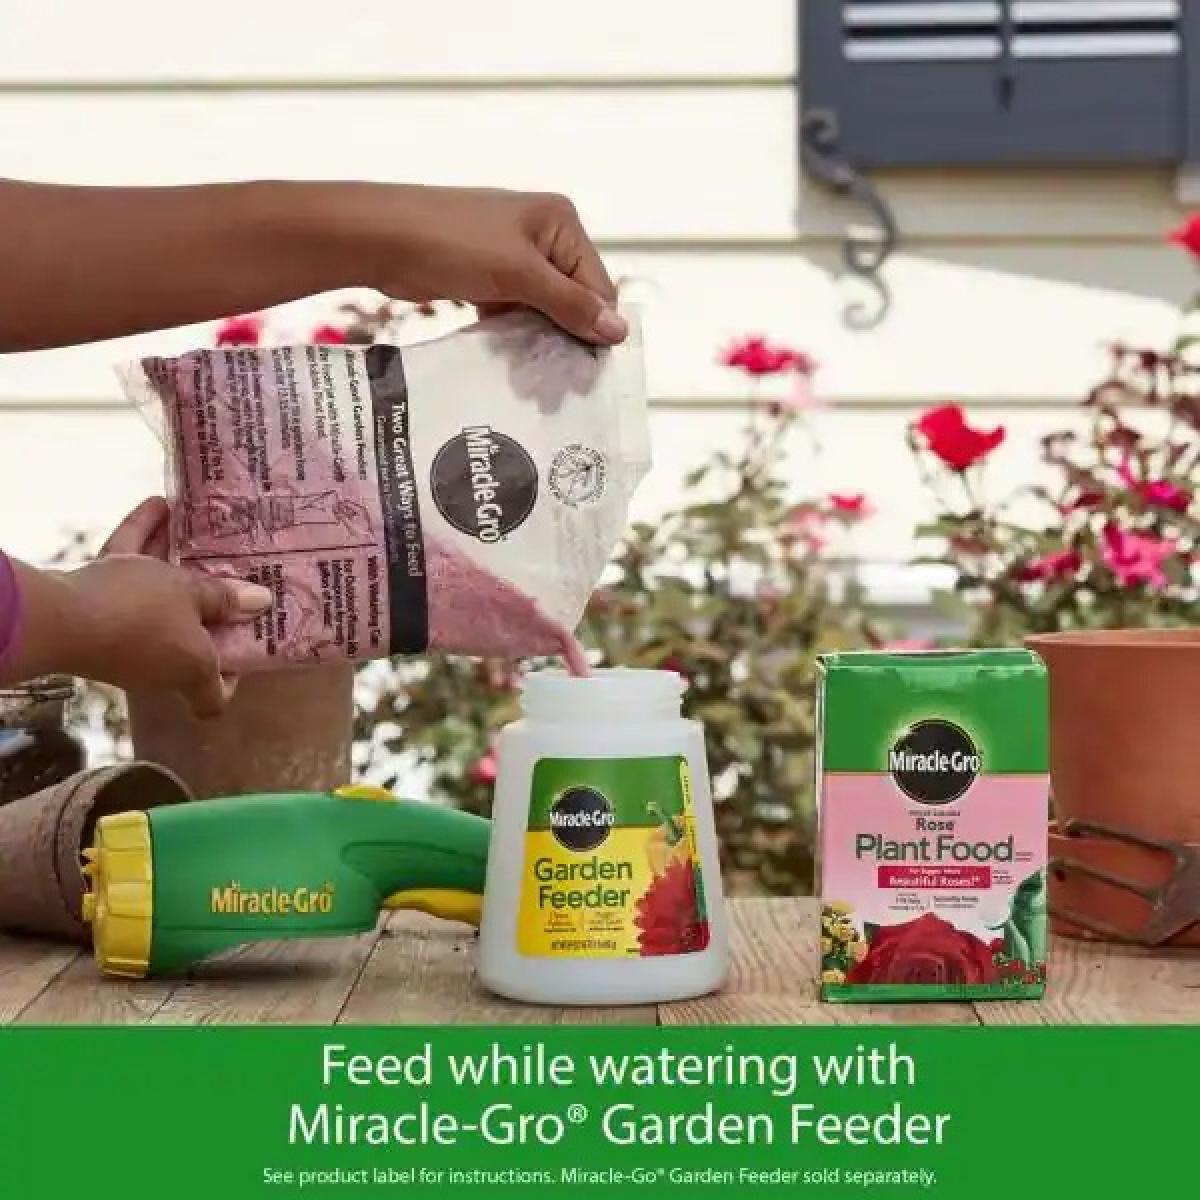 Scotts Miracle-Gro Water Soluble Rose Plant Food